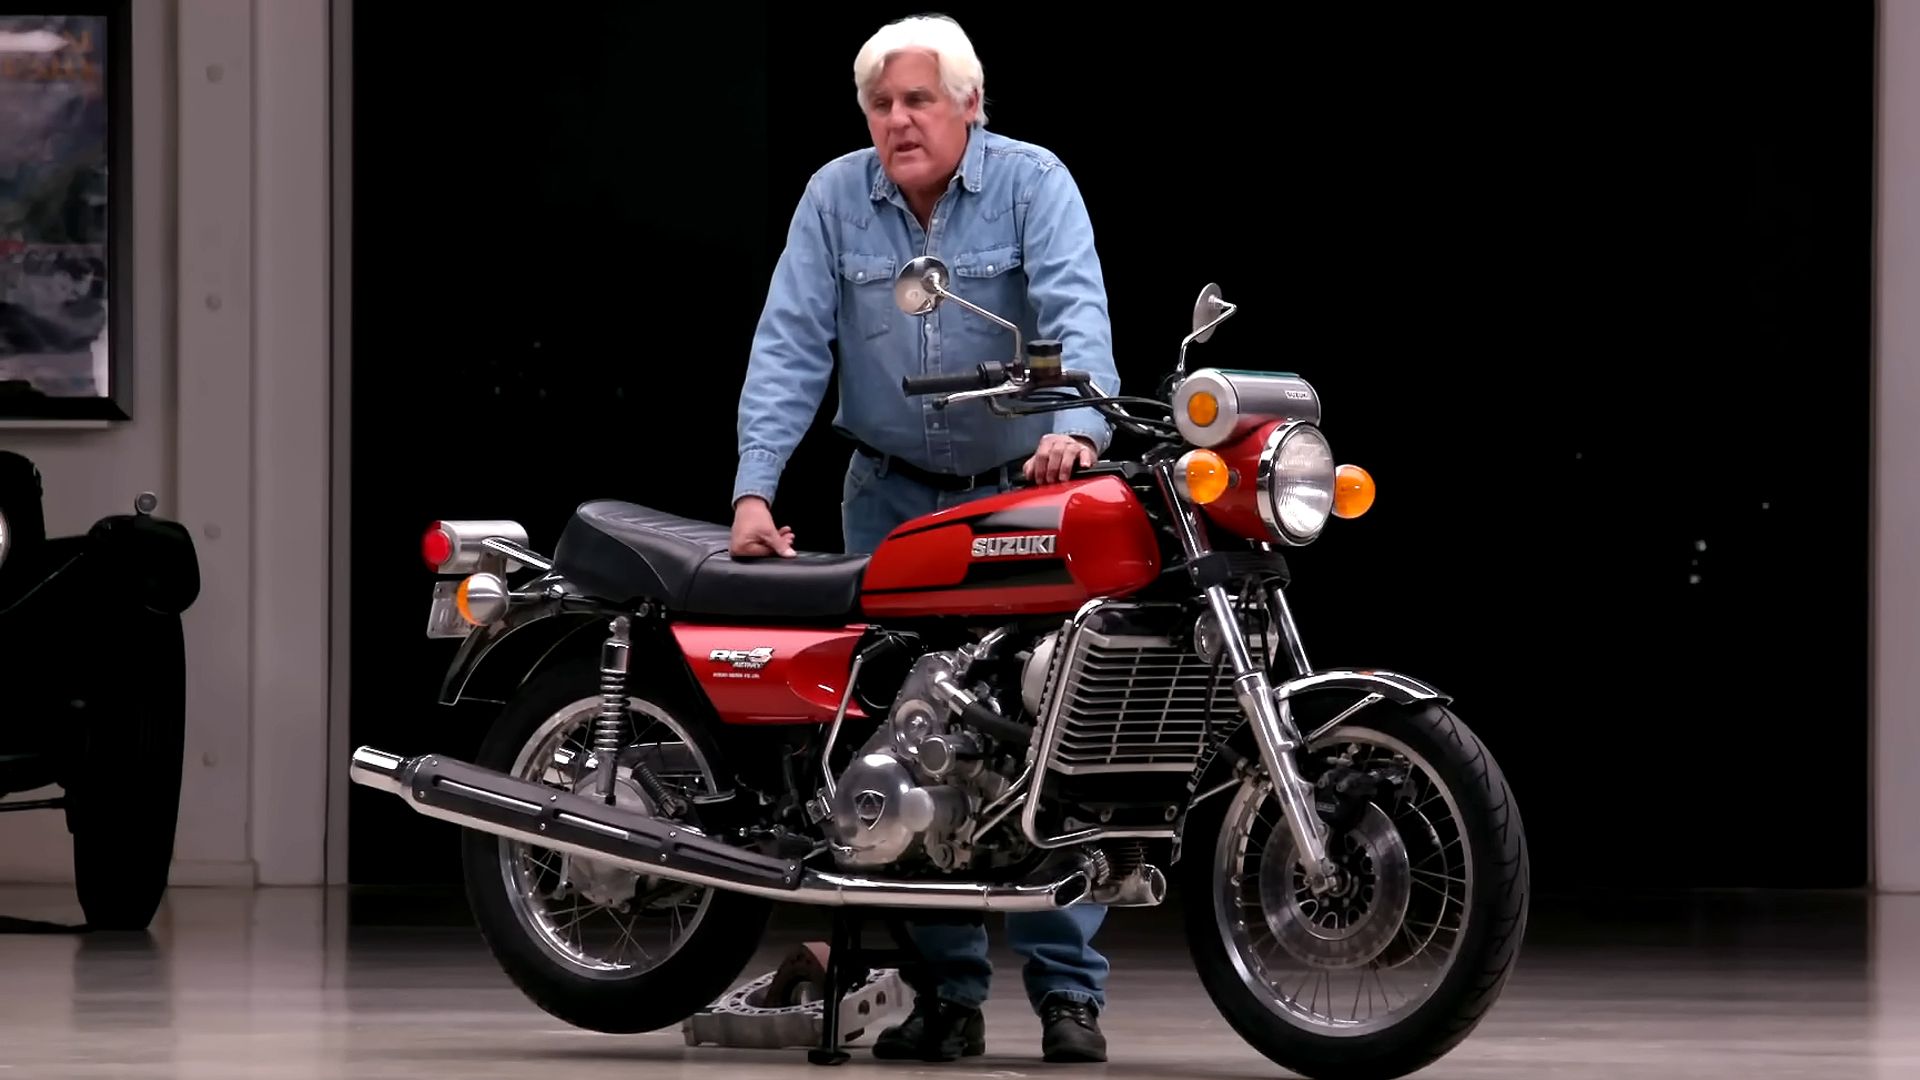 Vintage 1975 Suzuki RE5 Rotary Engine Motorcycle from Jay Leno's Garage